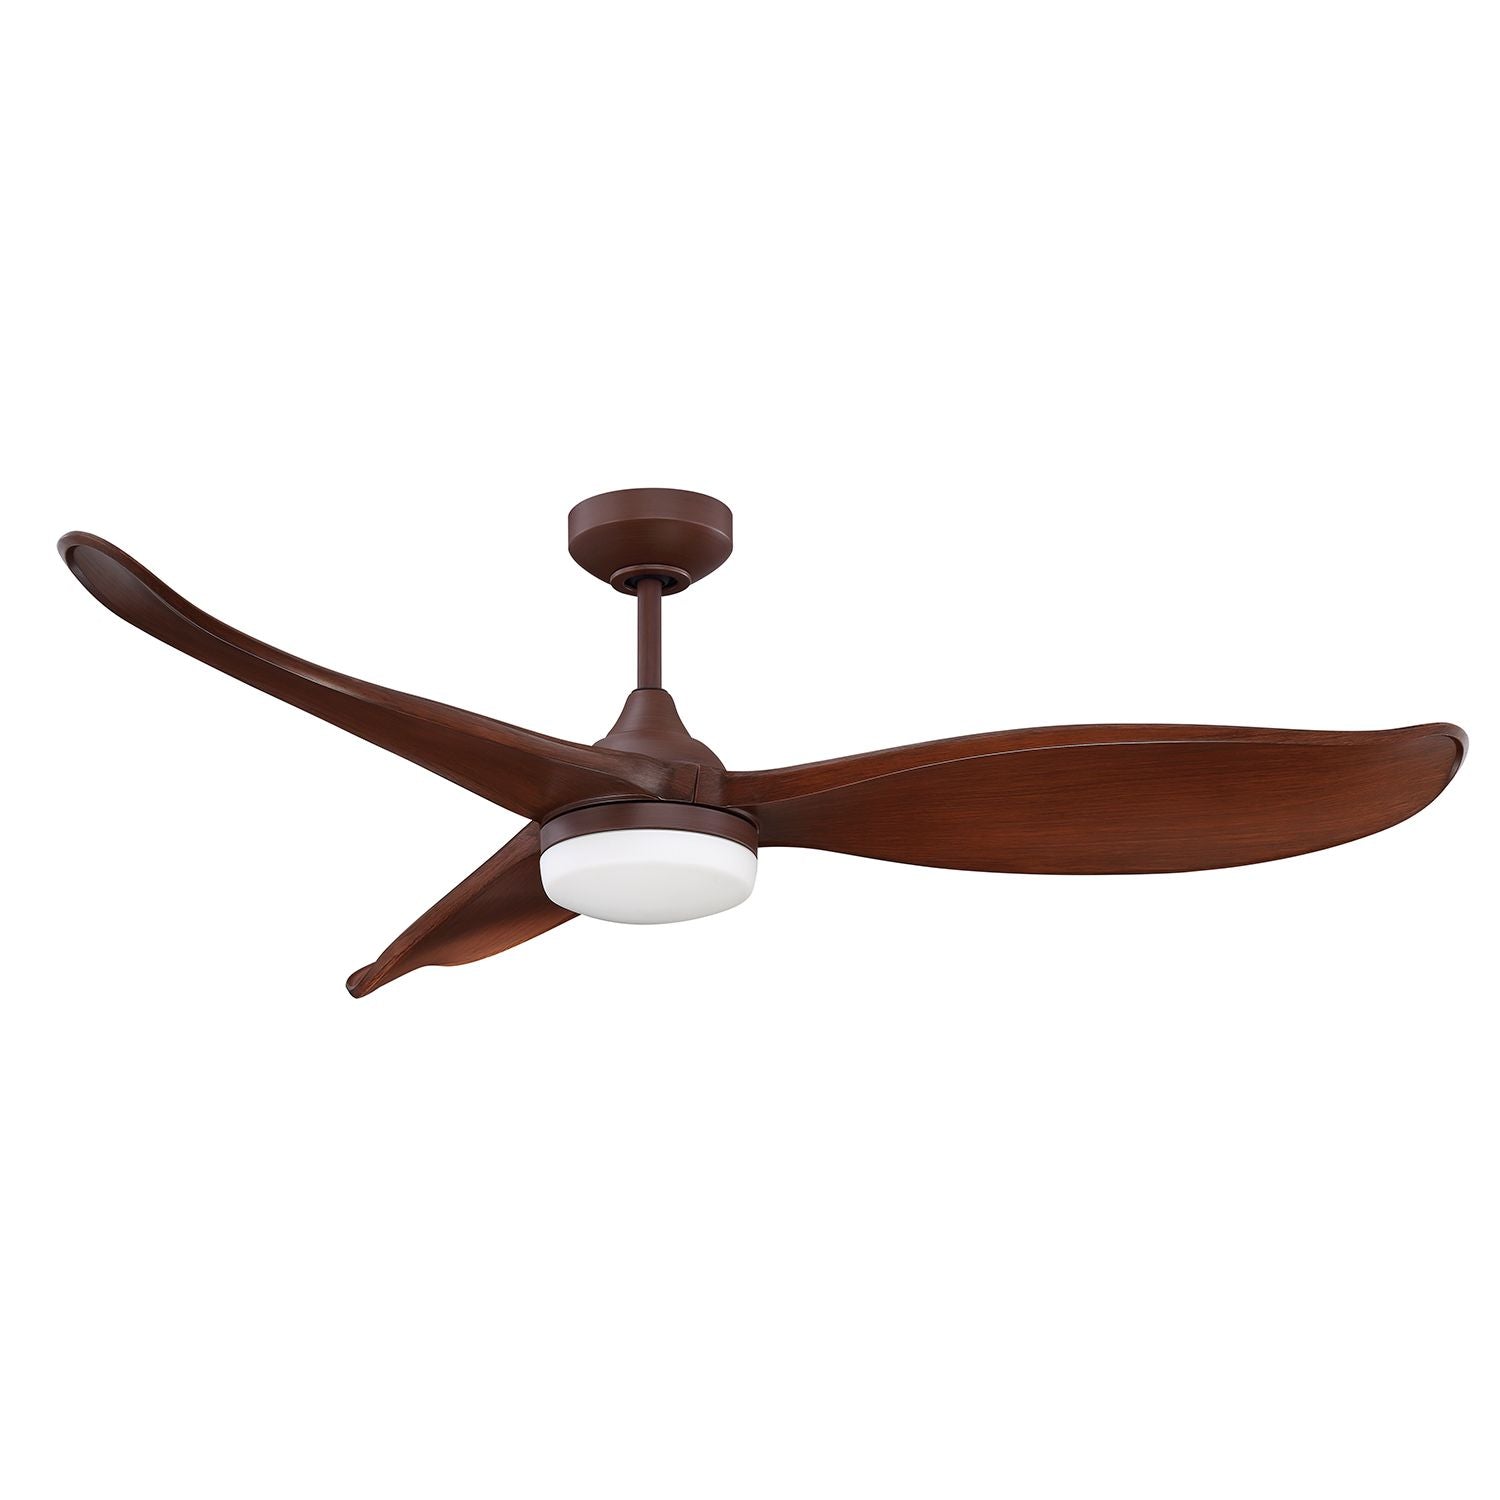 Triax Ceiling Fan Russet Chestnut with matching blades